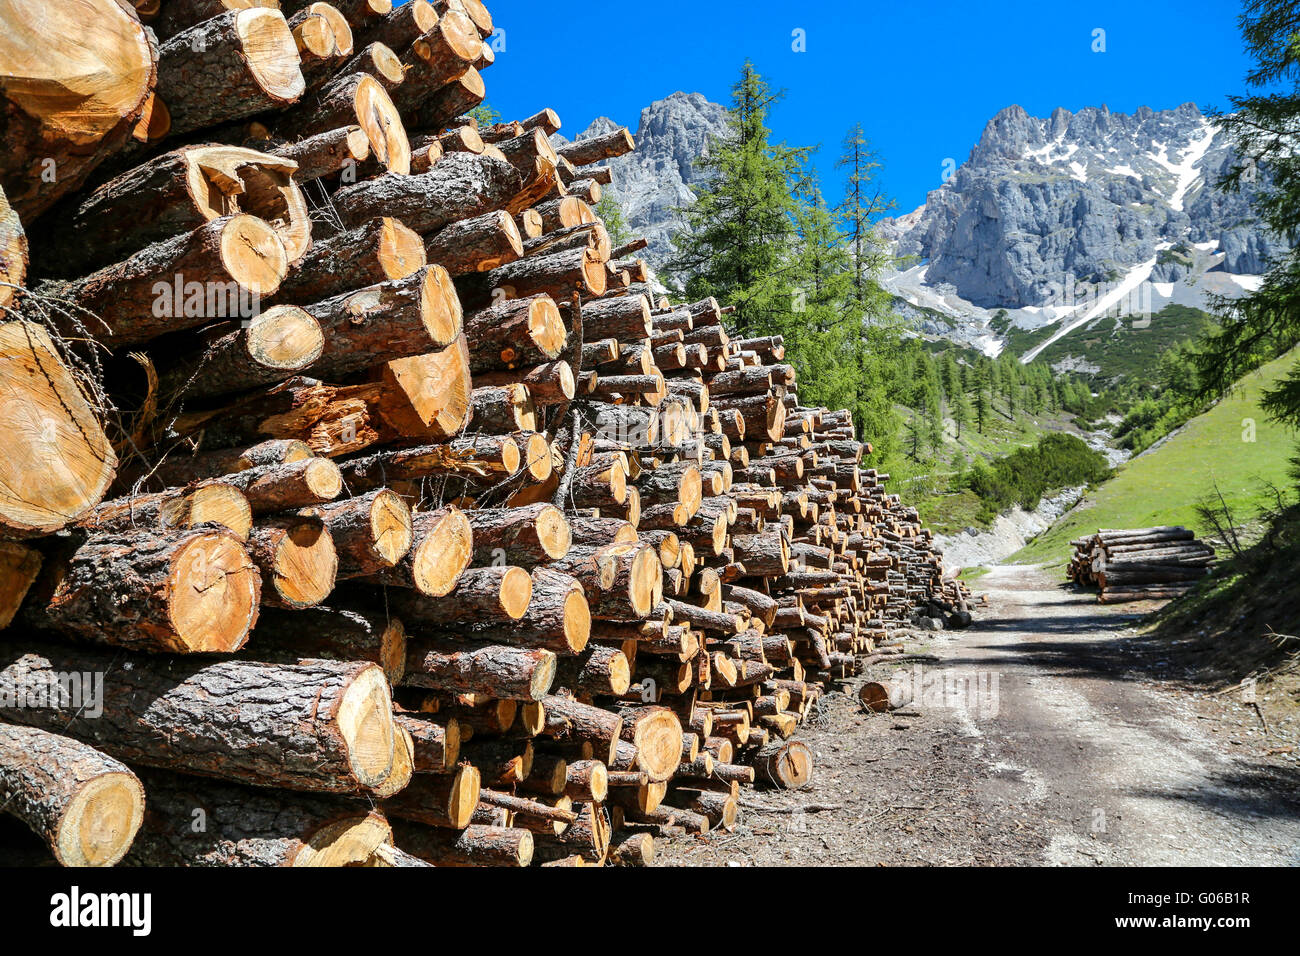 ood-processing industry / timber / alps Stock Photo